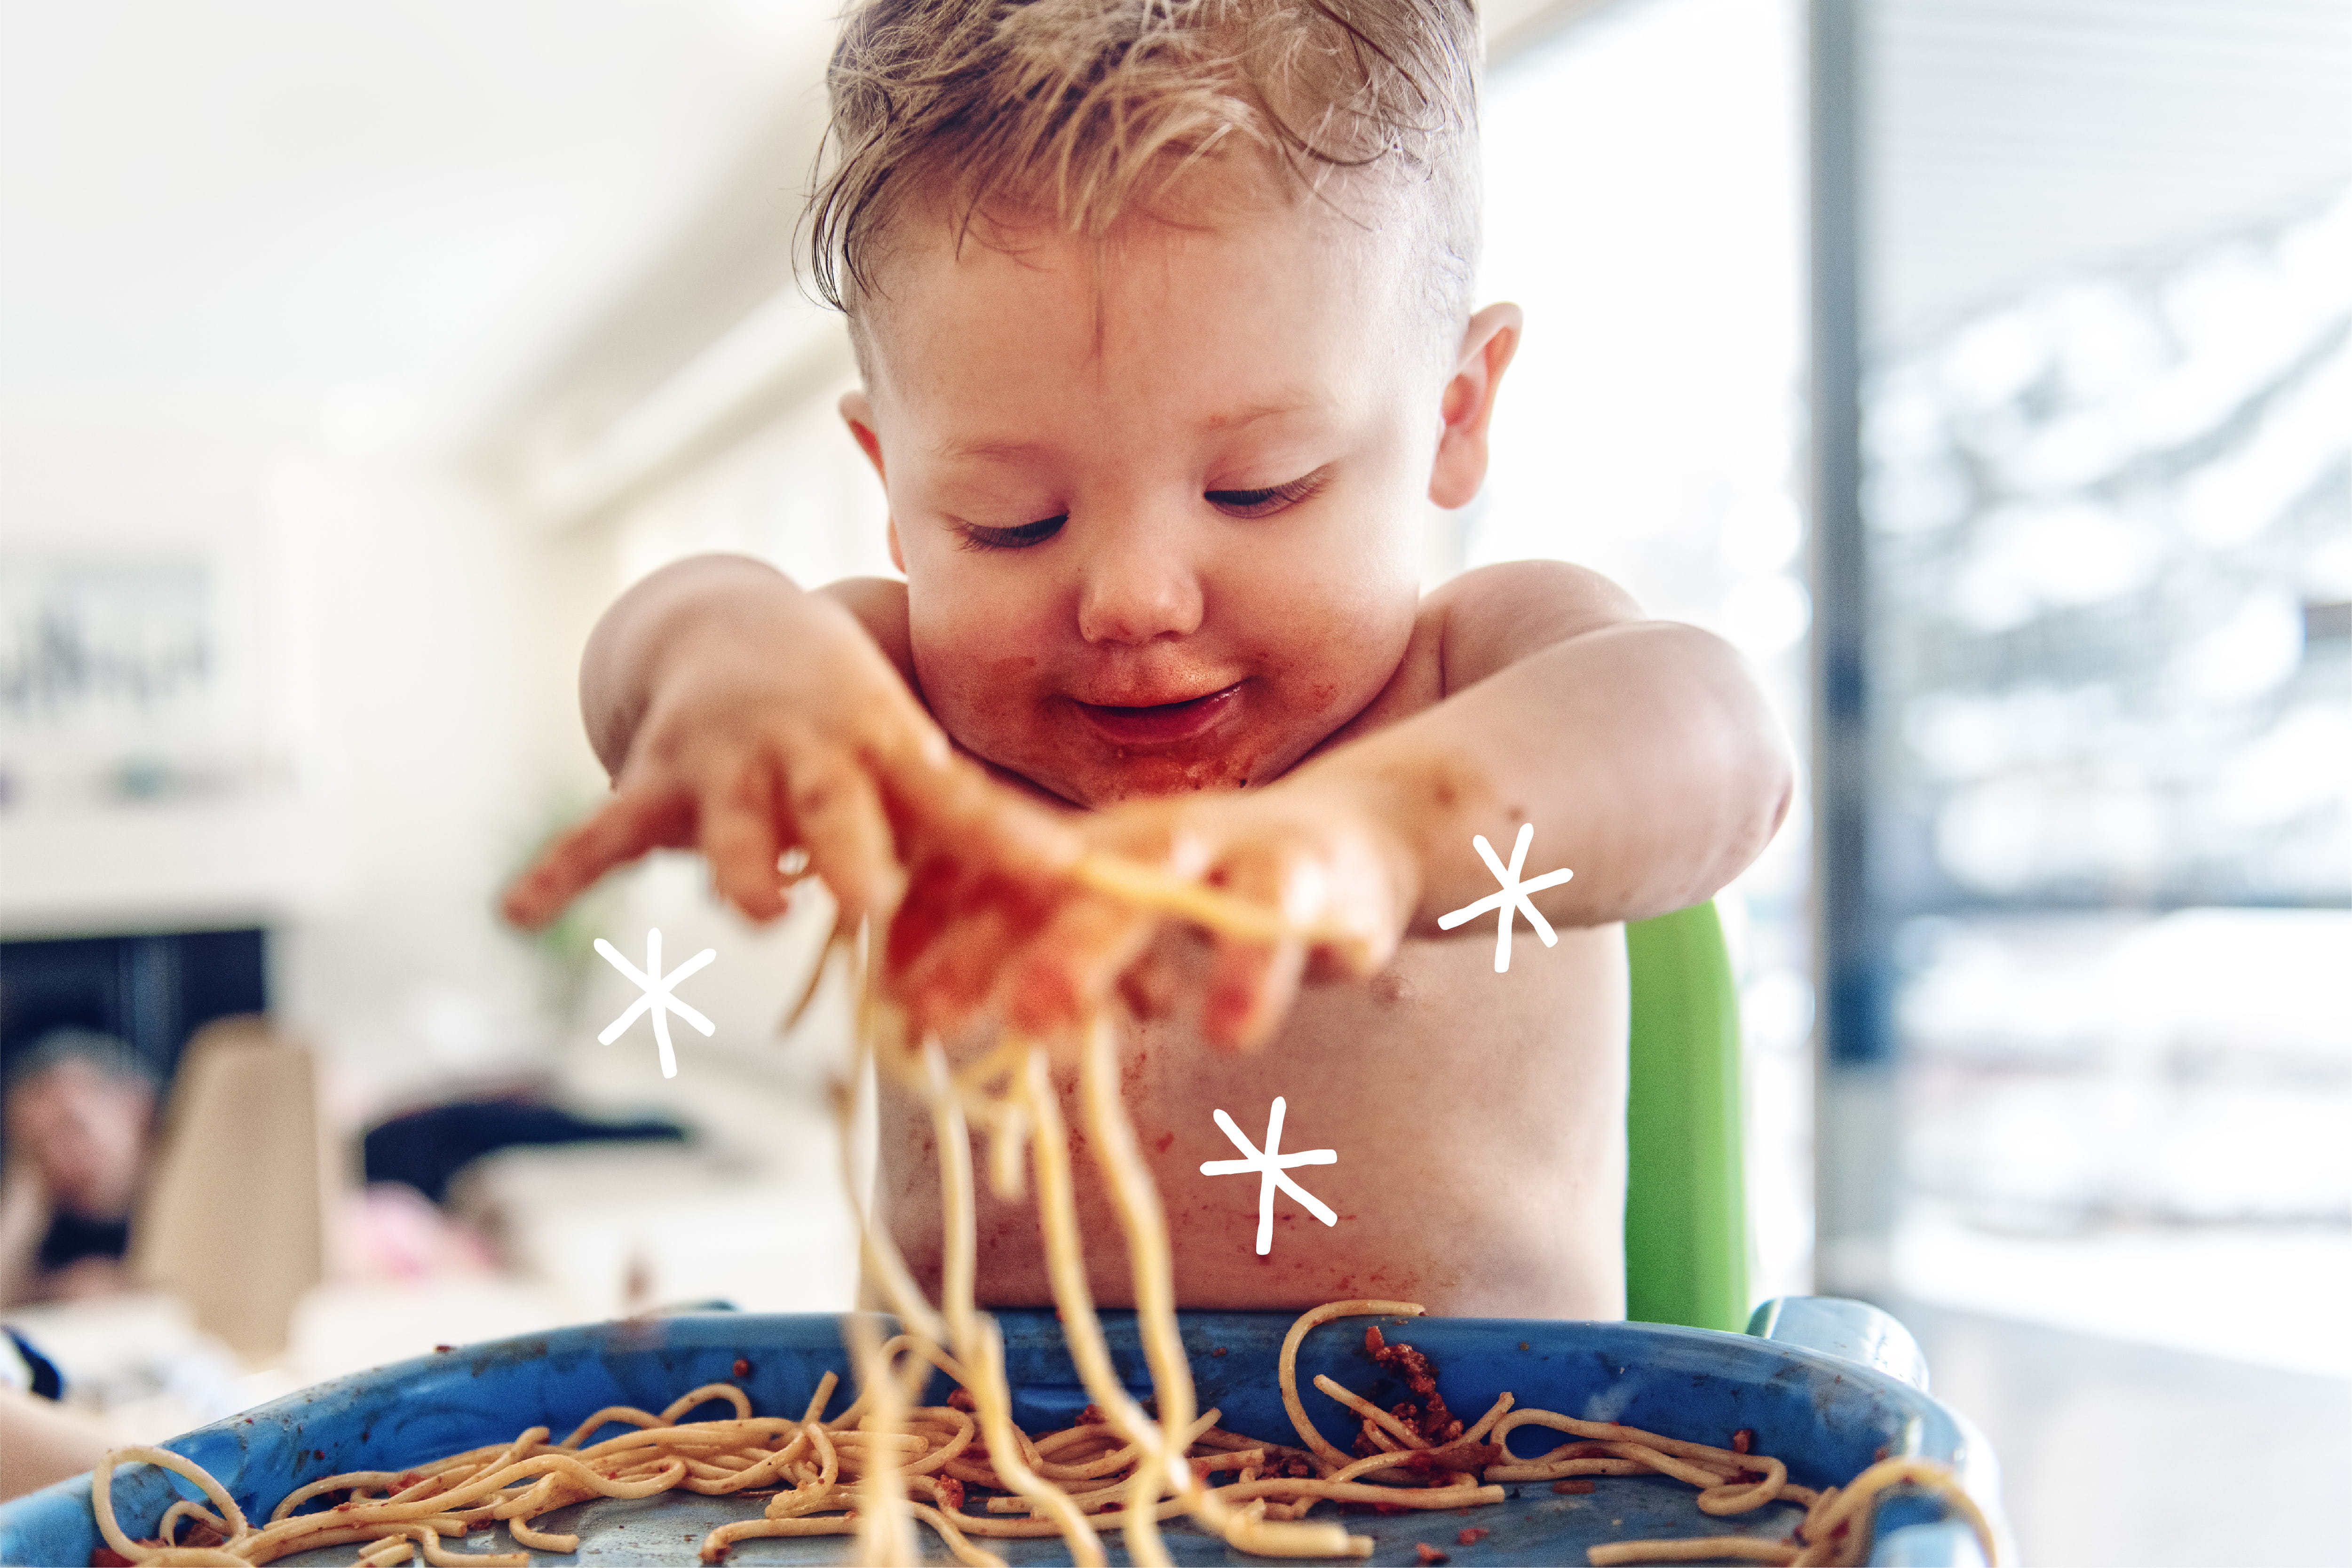 https://www.kindercare.com/-/media/contenthub/images/article-images/lets-eat/baby-foods/kclc_blog_playing_with_food.jpg